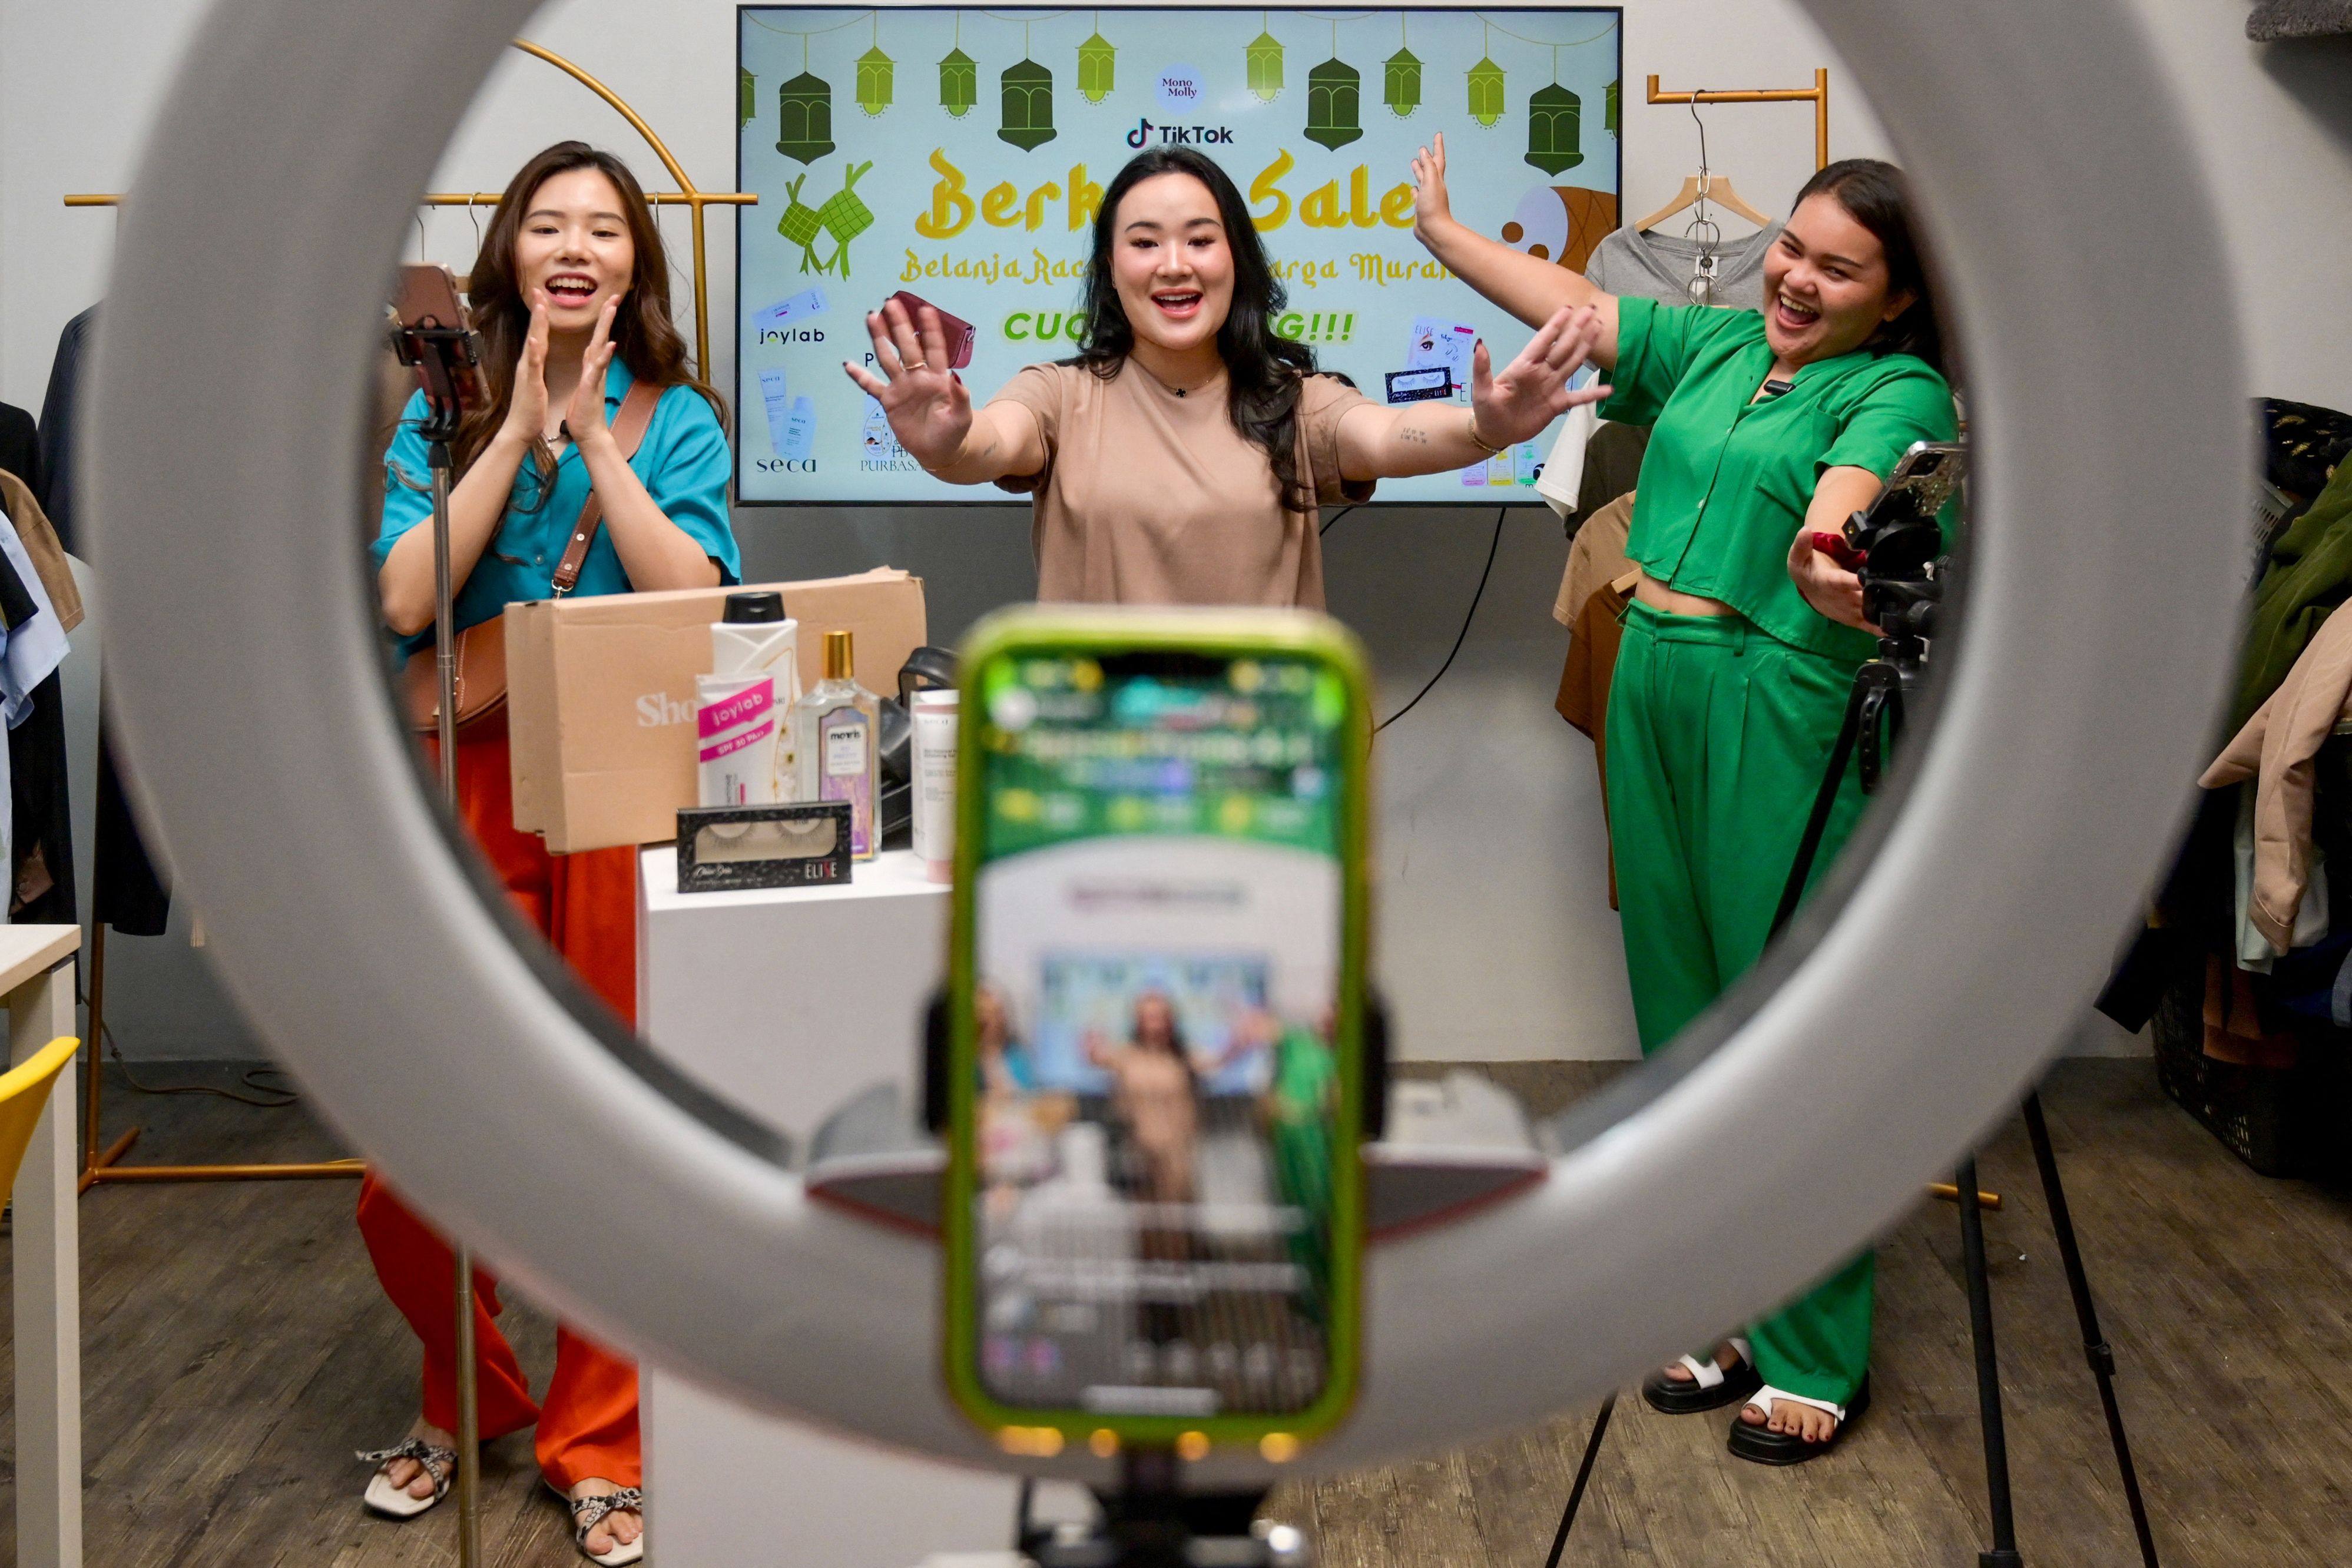 Monica Amadea (centre), owner of a TikTok sales channel called Monomolly, and her employees offer merchandise in a live stream from Jakarta on April 4, 2023. Indonesia has banned e-commerce transactions on social media to protect local business, threatening TikTok’s business model. Photo: AFP